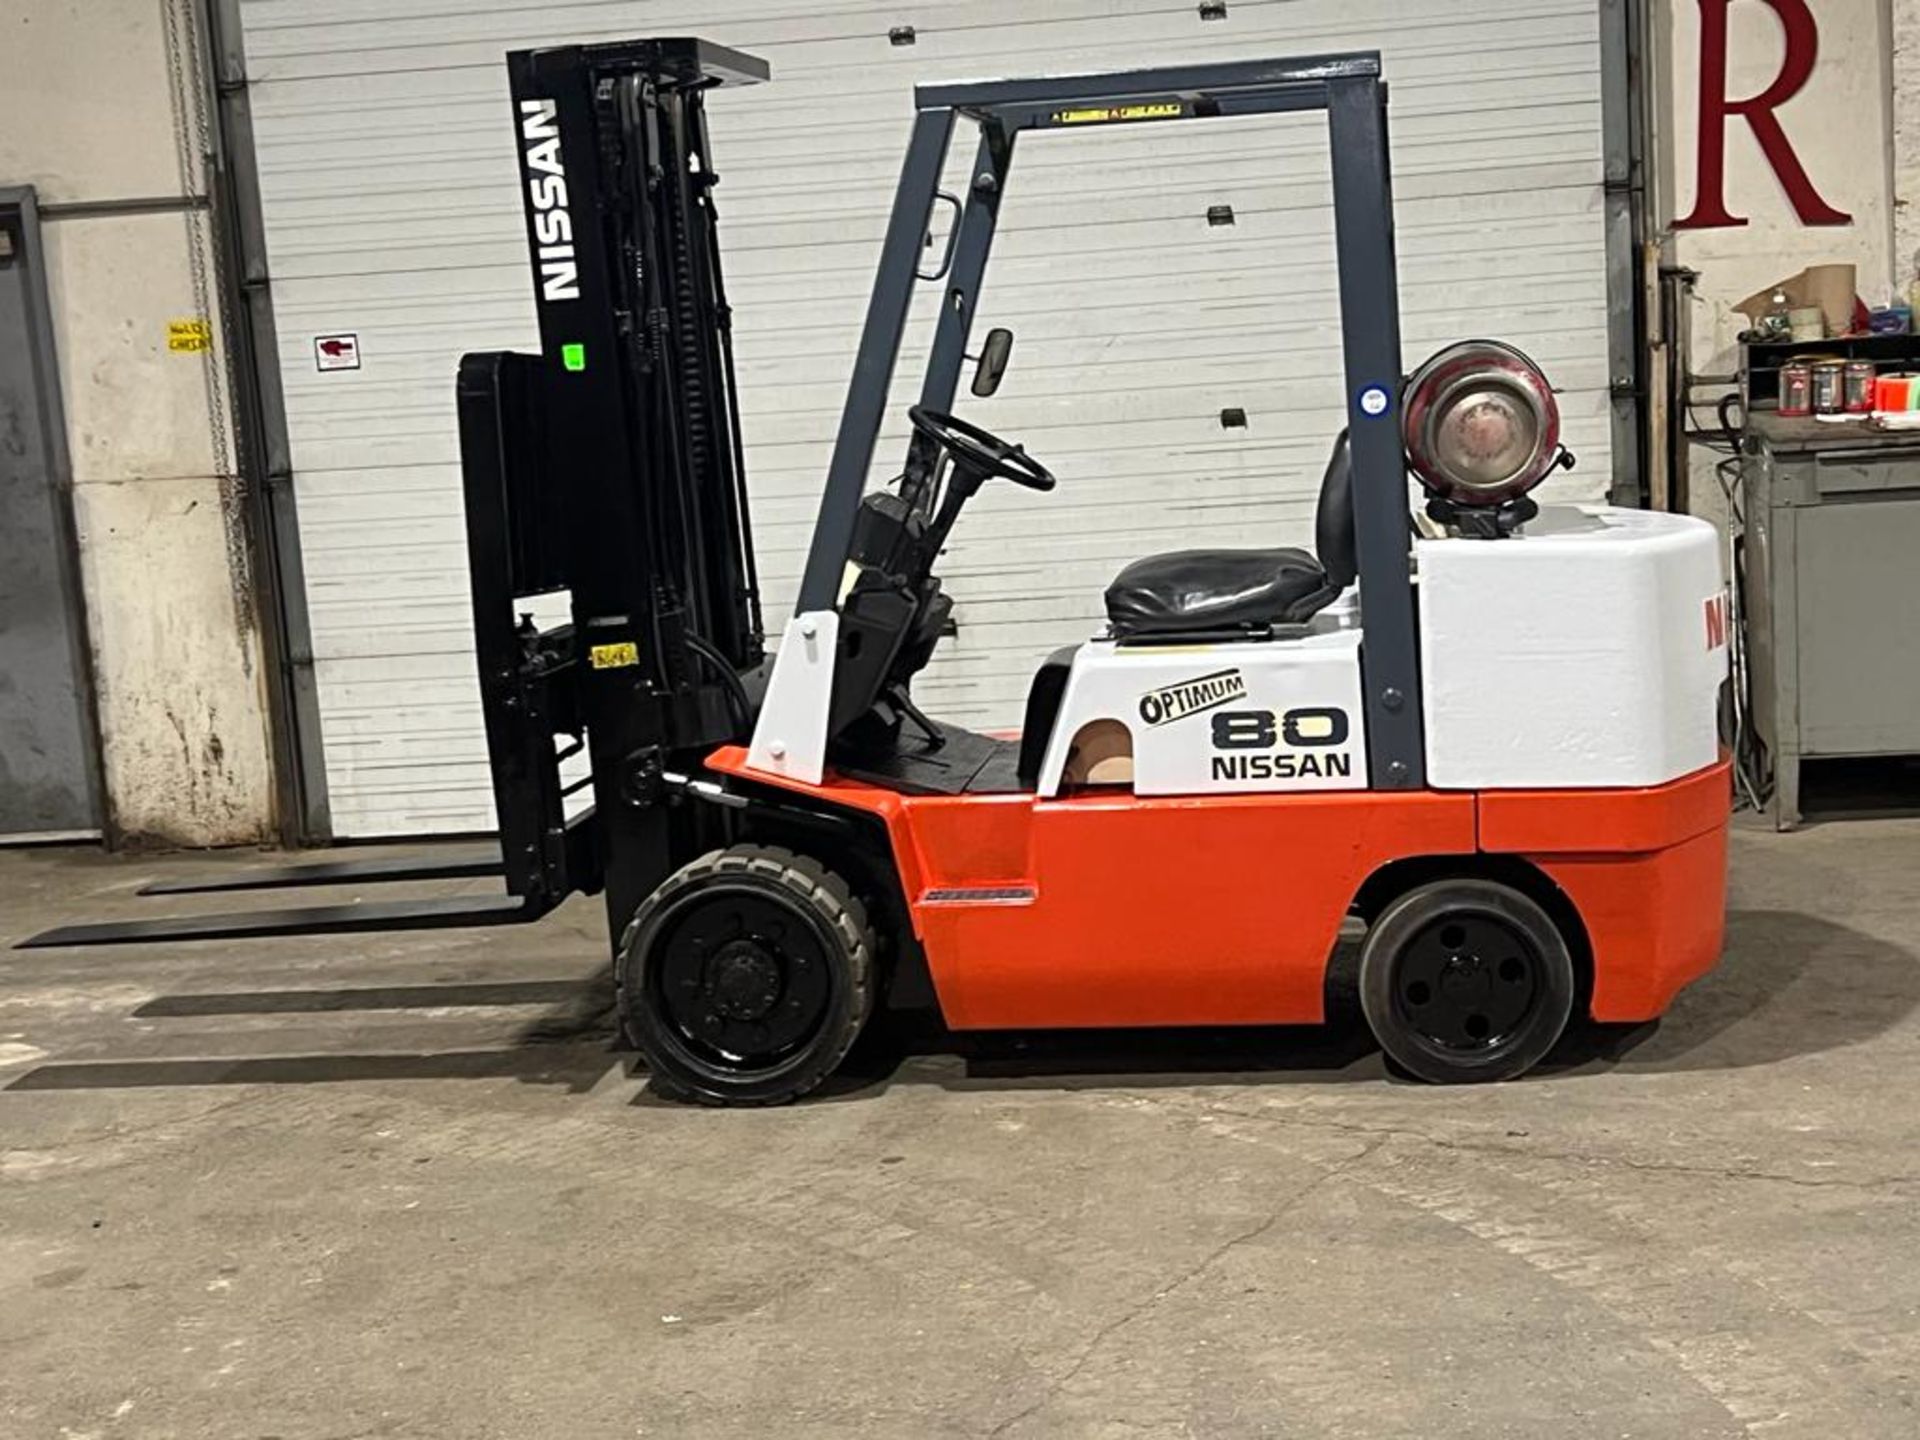 Nissan 80 - 8,000lbs Capacity Forklift with Sideshift & 3 stage mast and Low Hours (no propane - Image 5 of 5